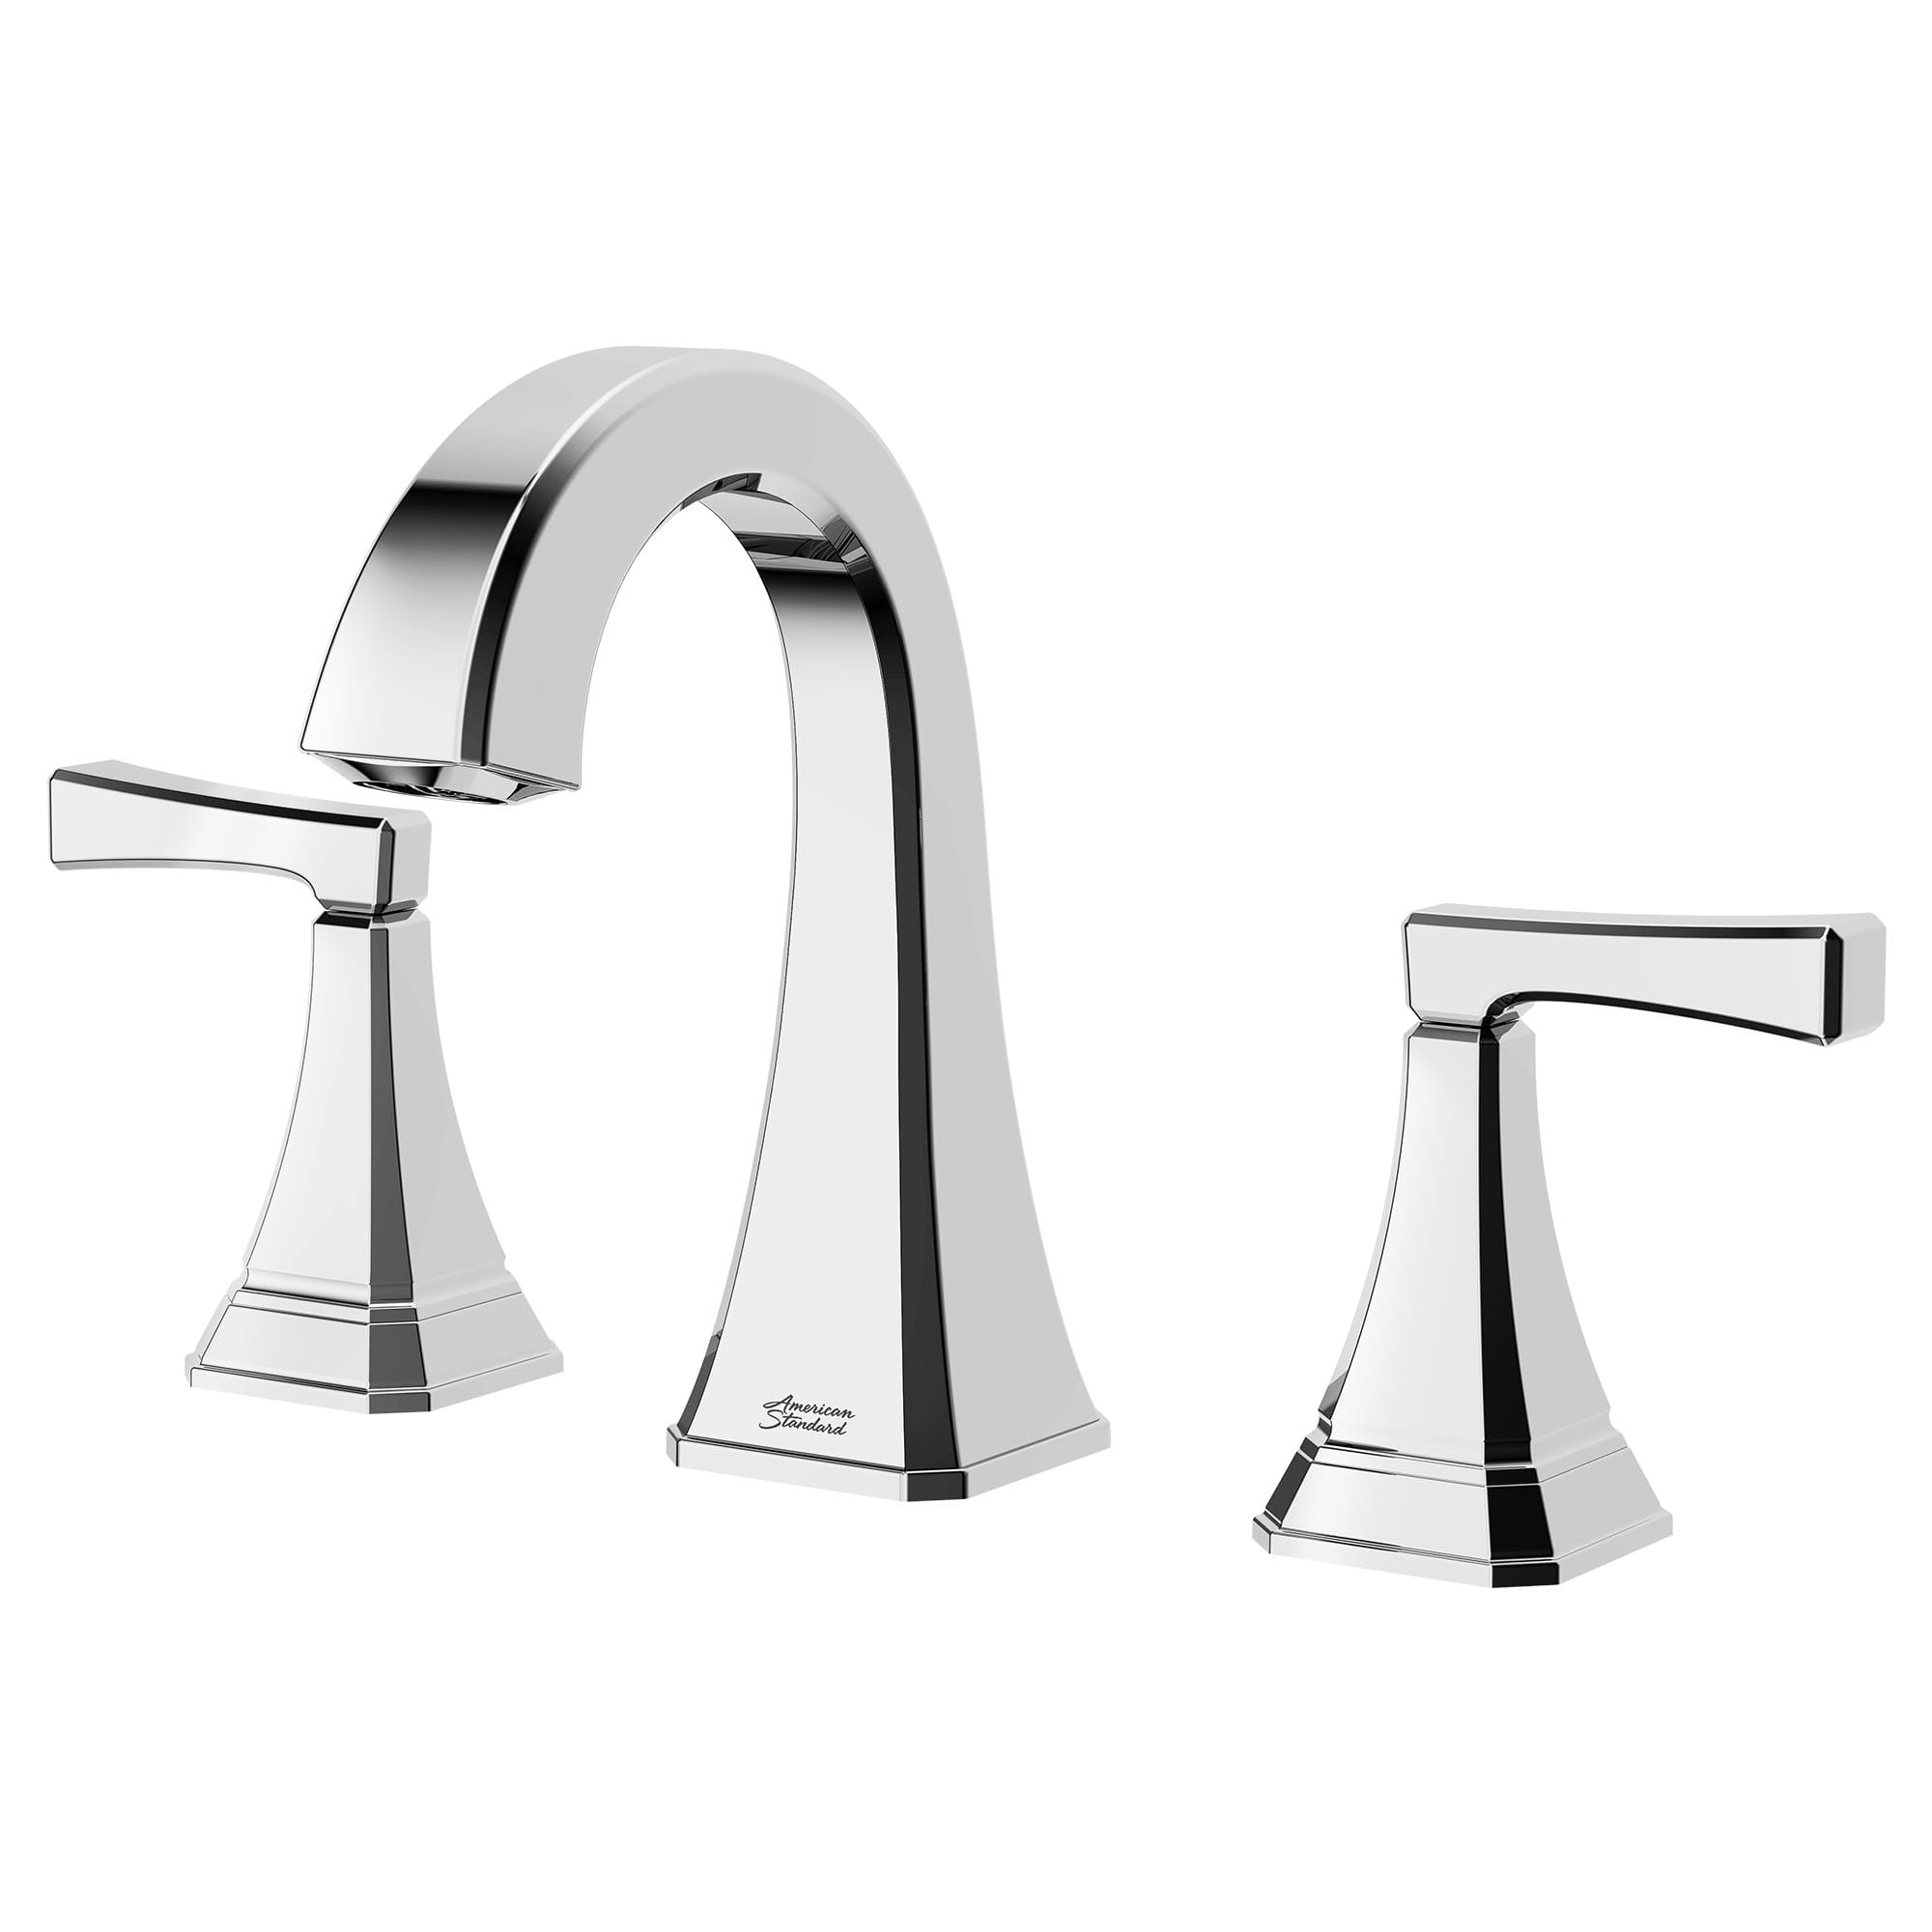 Westerly 8 In Widespread 2 Handle Bathroom Faucet 12 GPM with Lever Handles CHROME